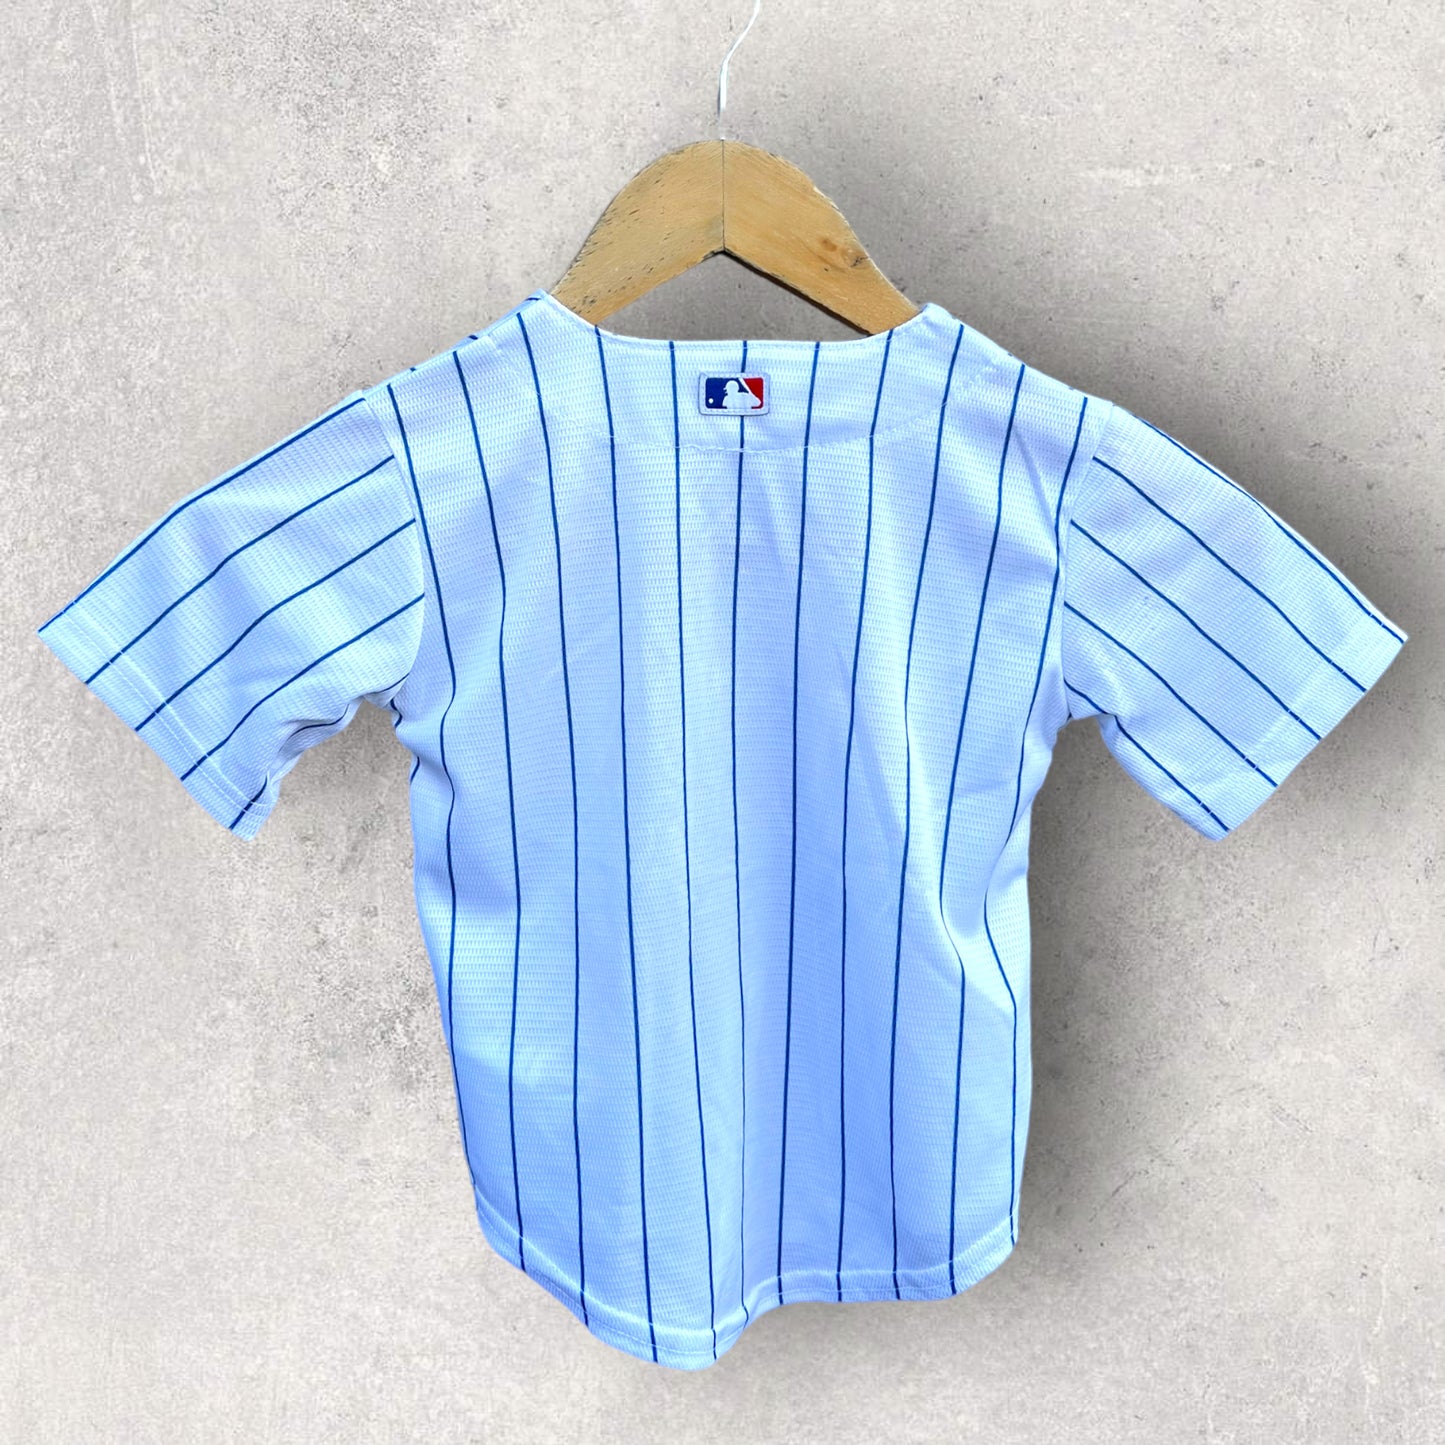 CHICAGO CUBS BABY BASEBALL JERSEY